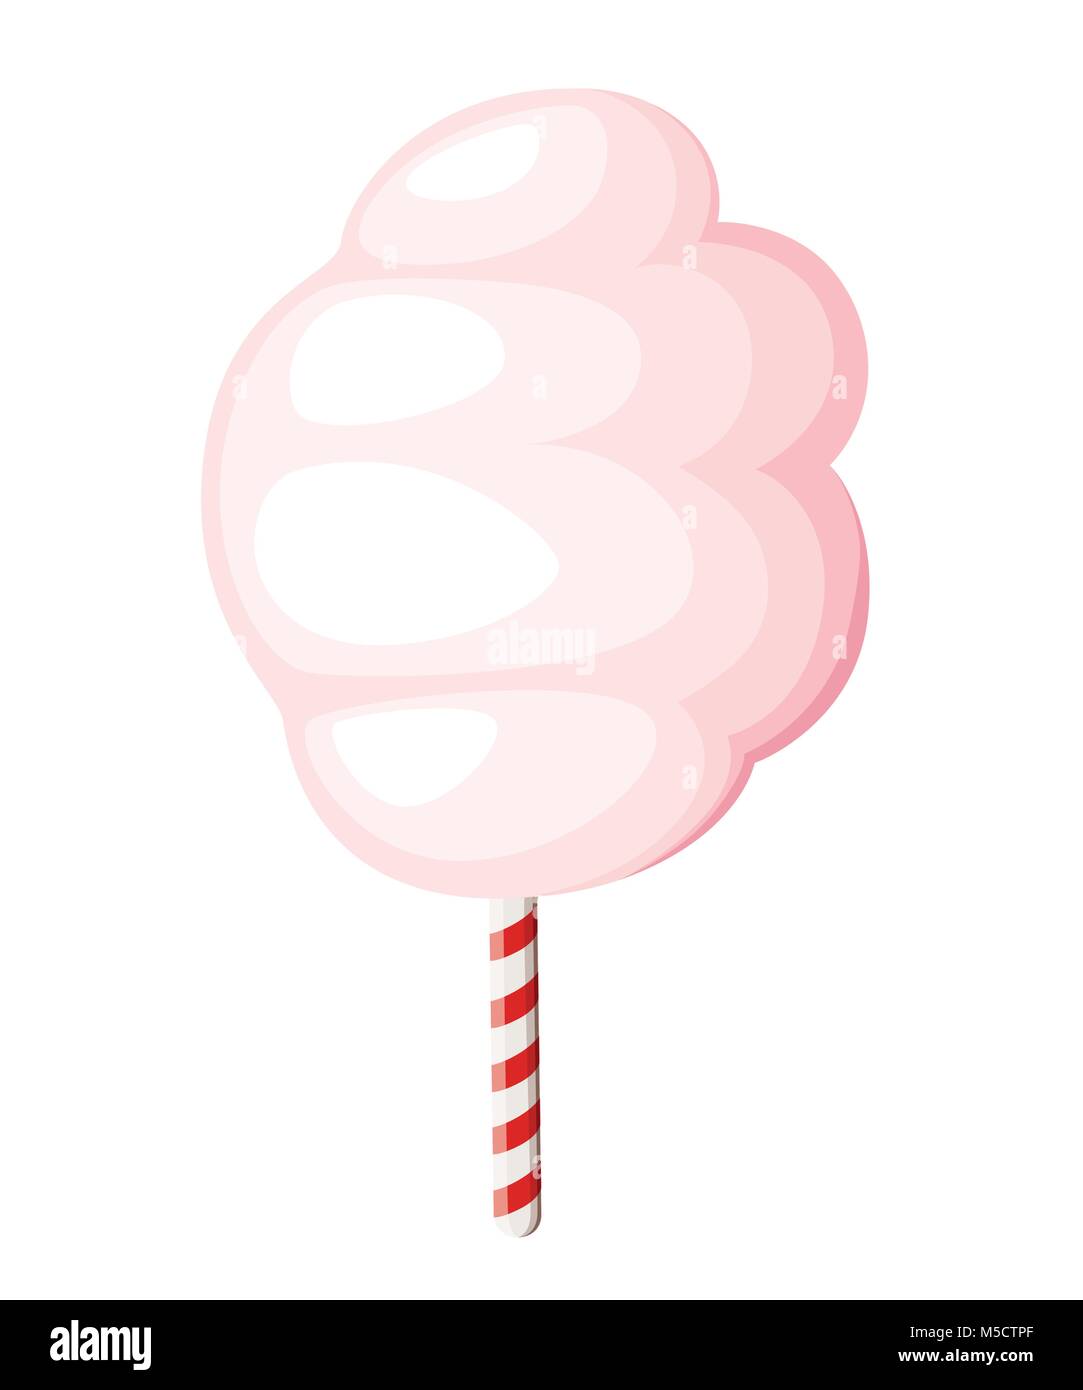 Pink cotton candy sugar cloud symbol icon dessert confection for your projects vector illustration isolated on white background web site page and mobi Stock Vector